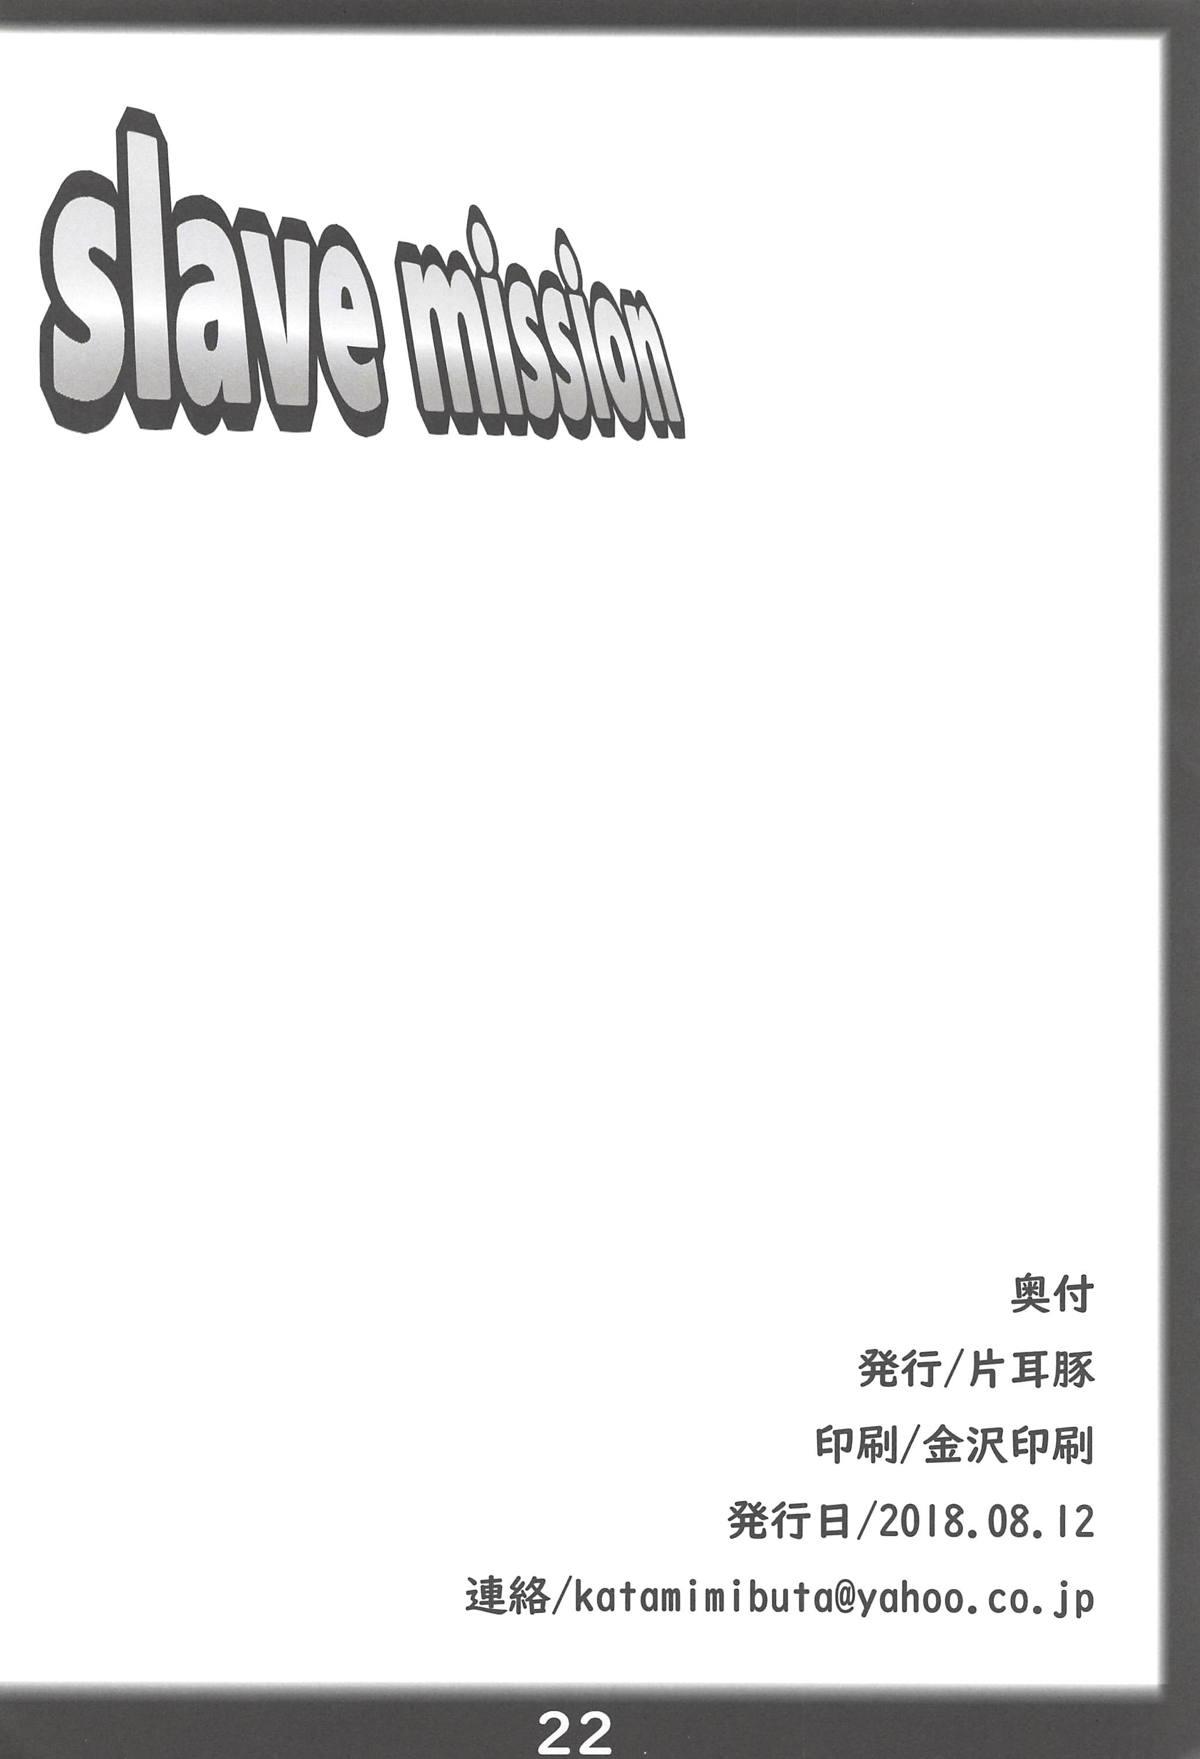 Petite slave mission - King of fighters Rubia - Page 21